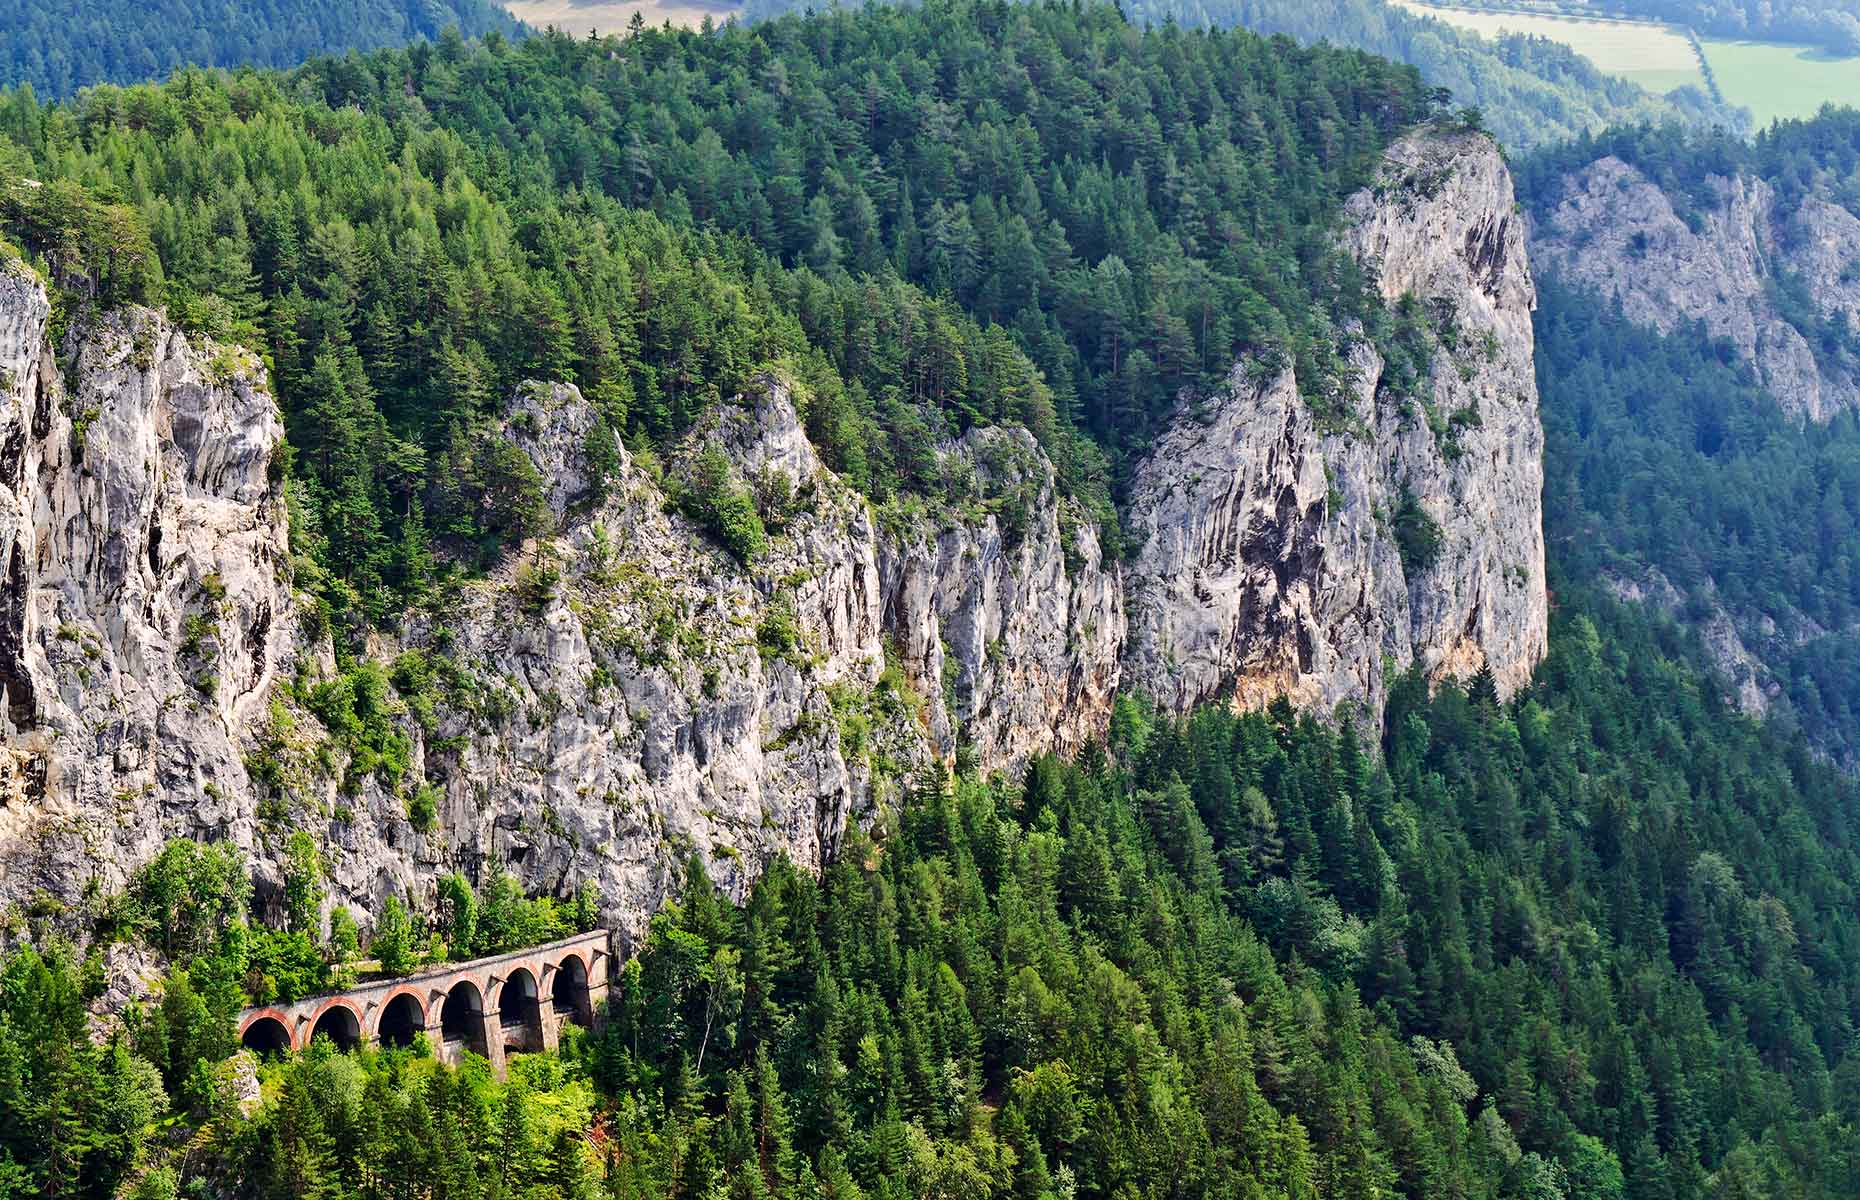 Semmering Railway in Lower Austria with a viaduct surrounded by pine trees (Image: dinkaspell/Shutterstock)